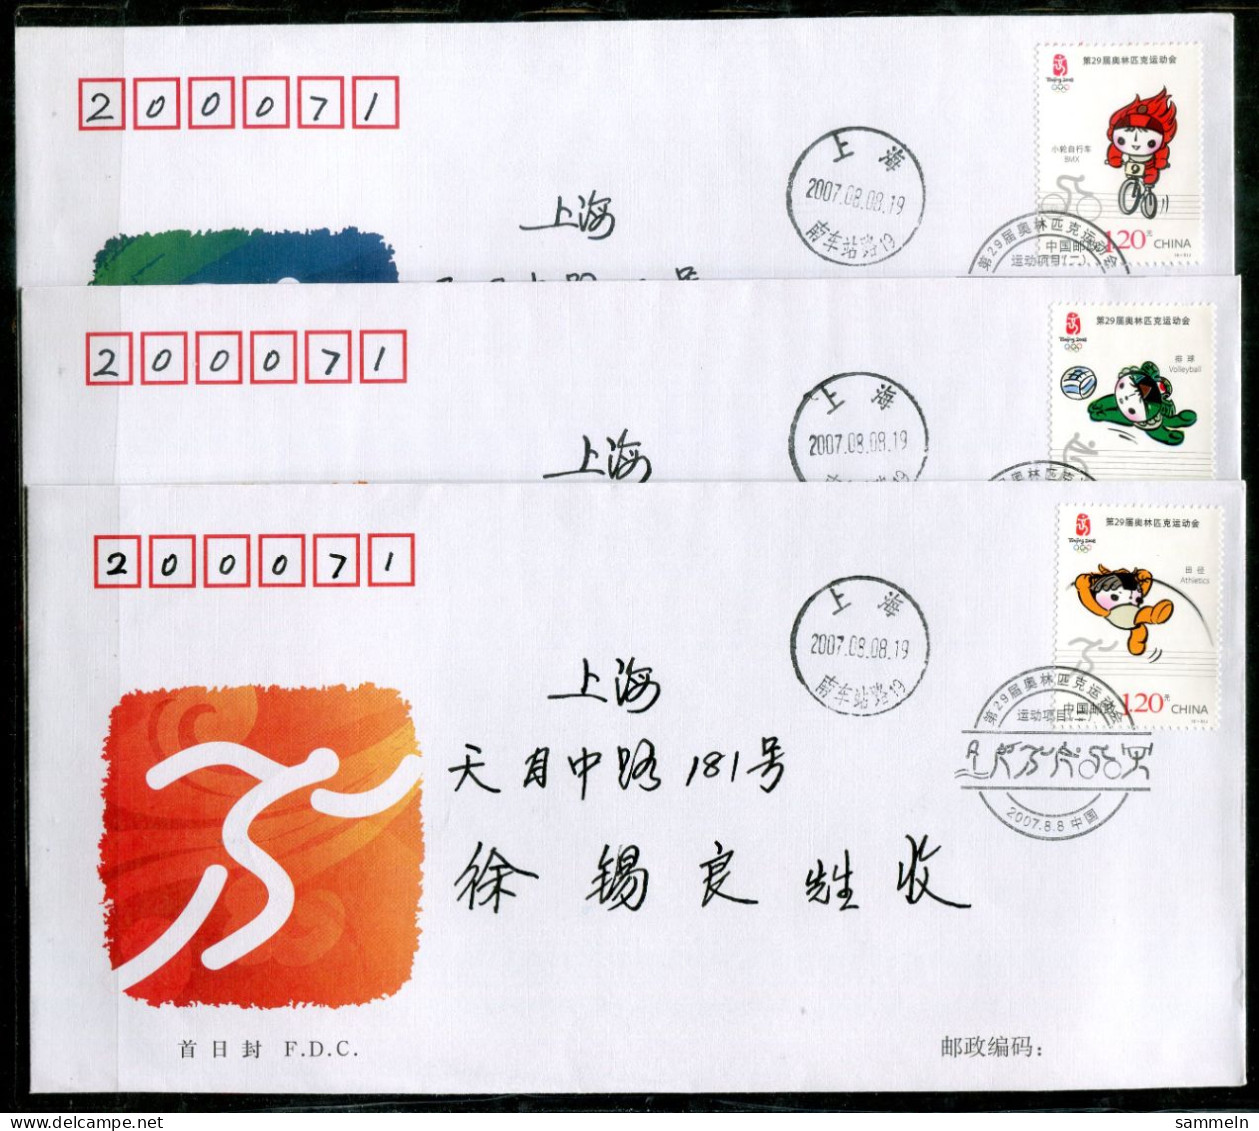 VR CHINA 3880 - 3885 - 6 FDC - Olympische Spiele Beijing - PR CHINA / RP CHINE - 2000-2009